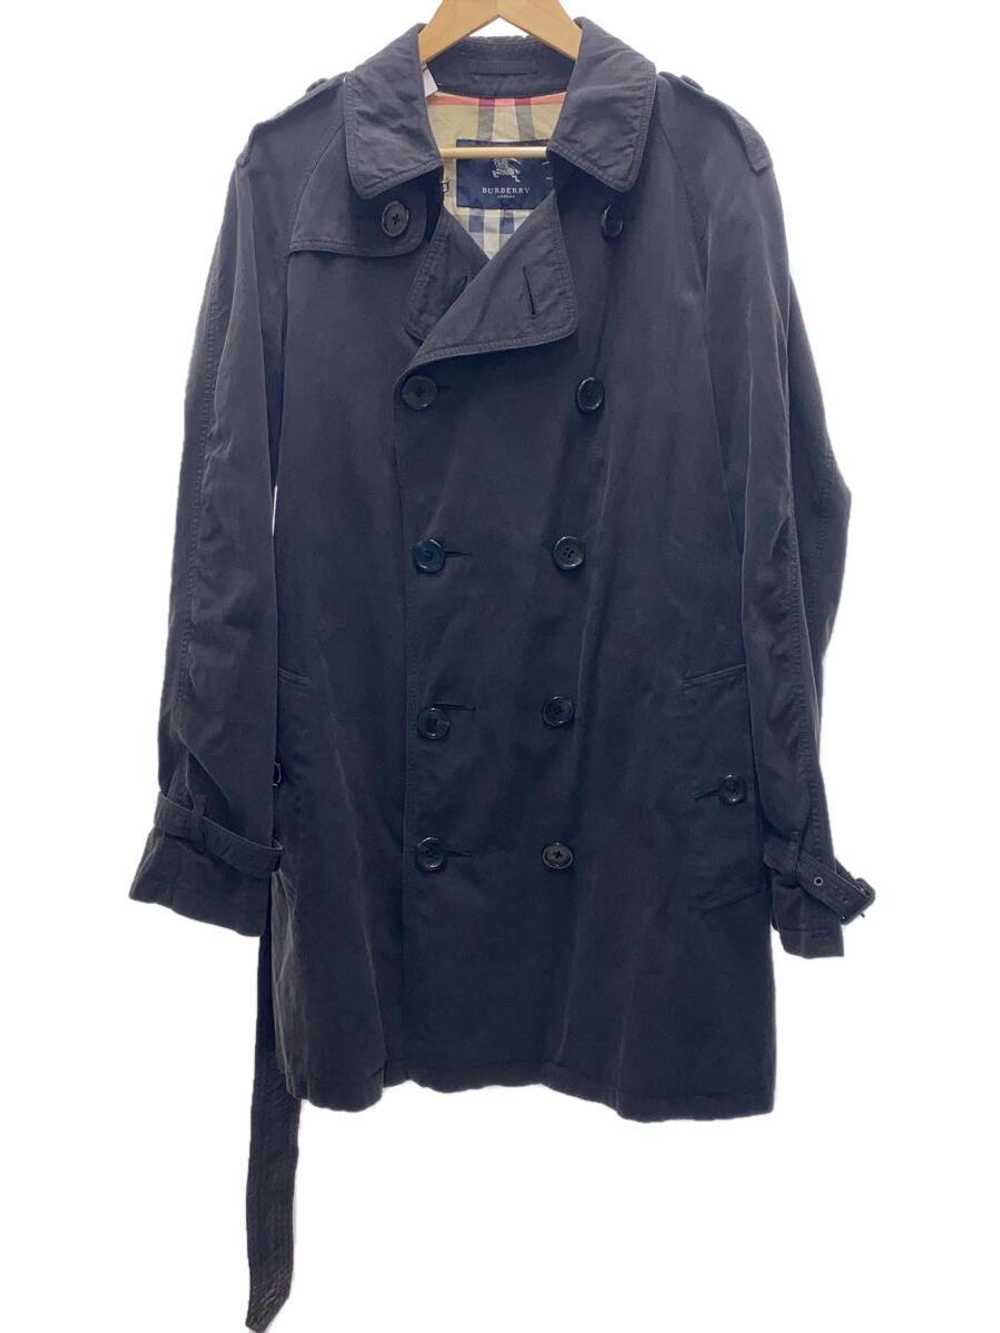 Burberry London Trench Coat/42/Cotton////Wear - image 1